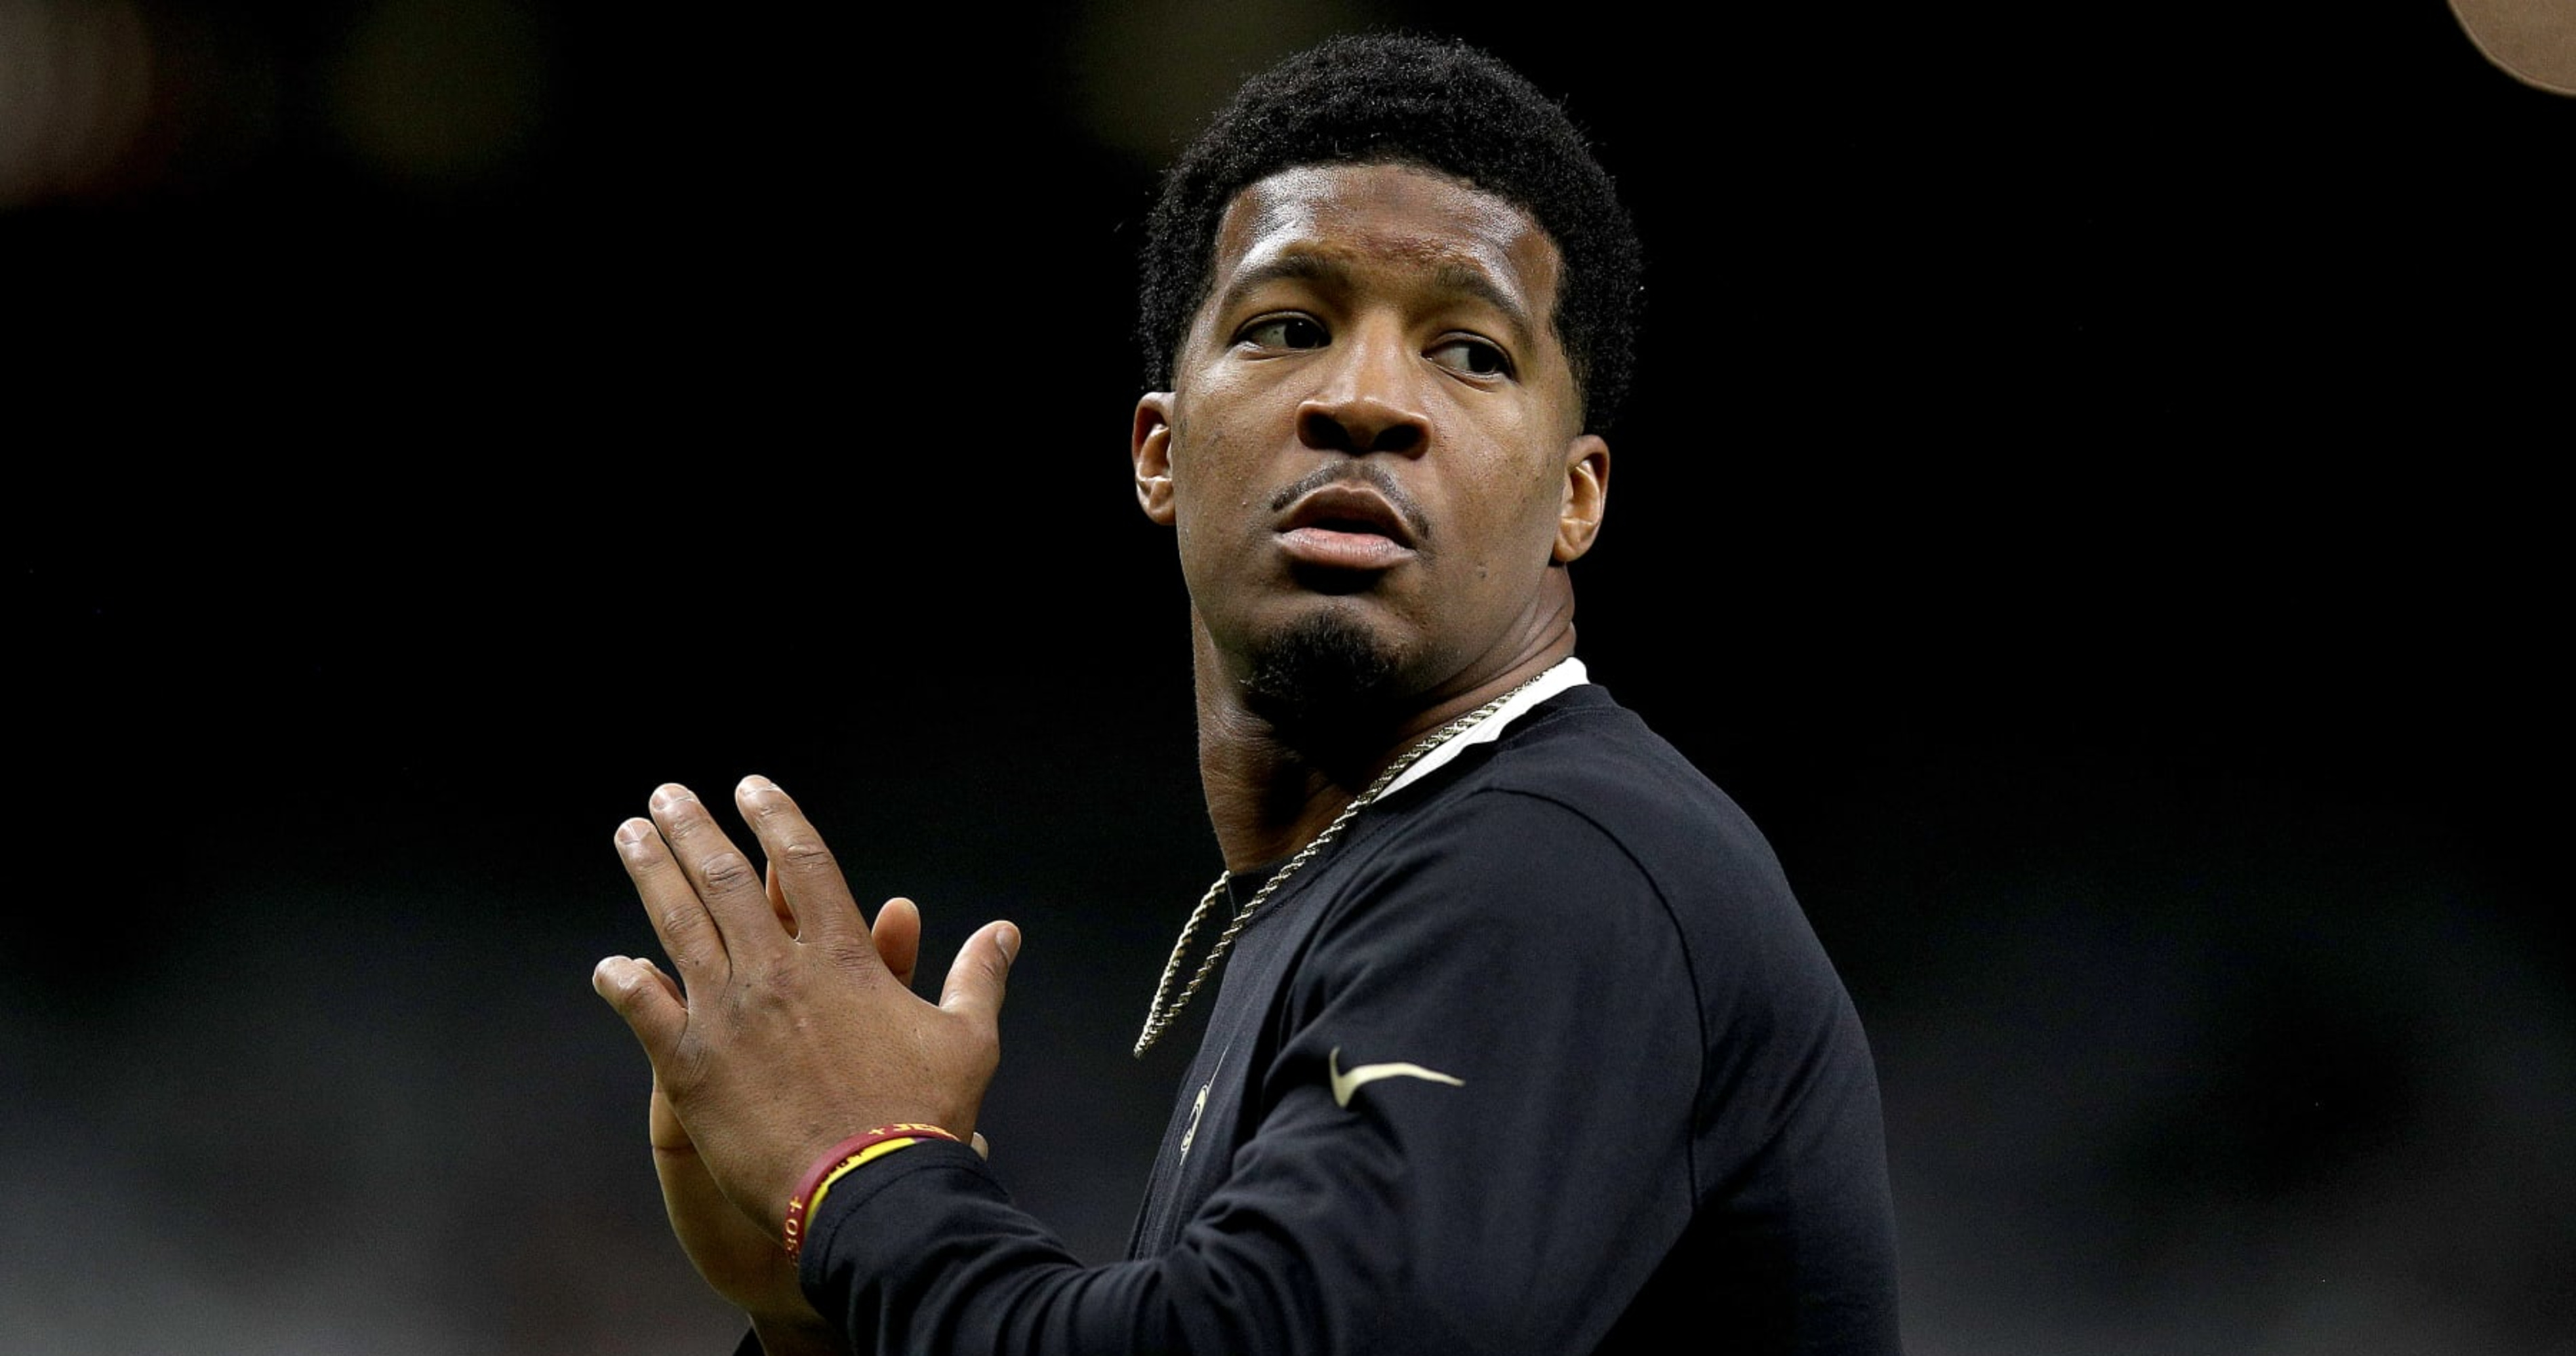 Jameis Winston Avoided 'Significant' Foot Injury and Is Day-to-Day, Says Saints ..